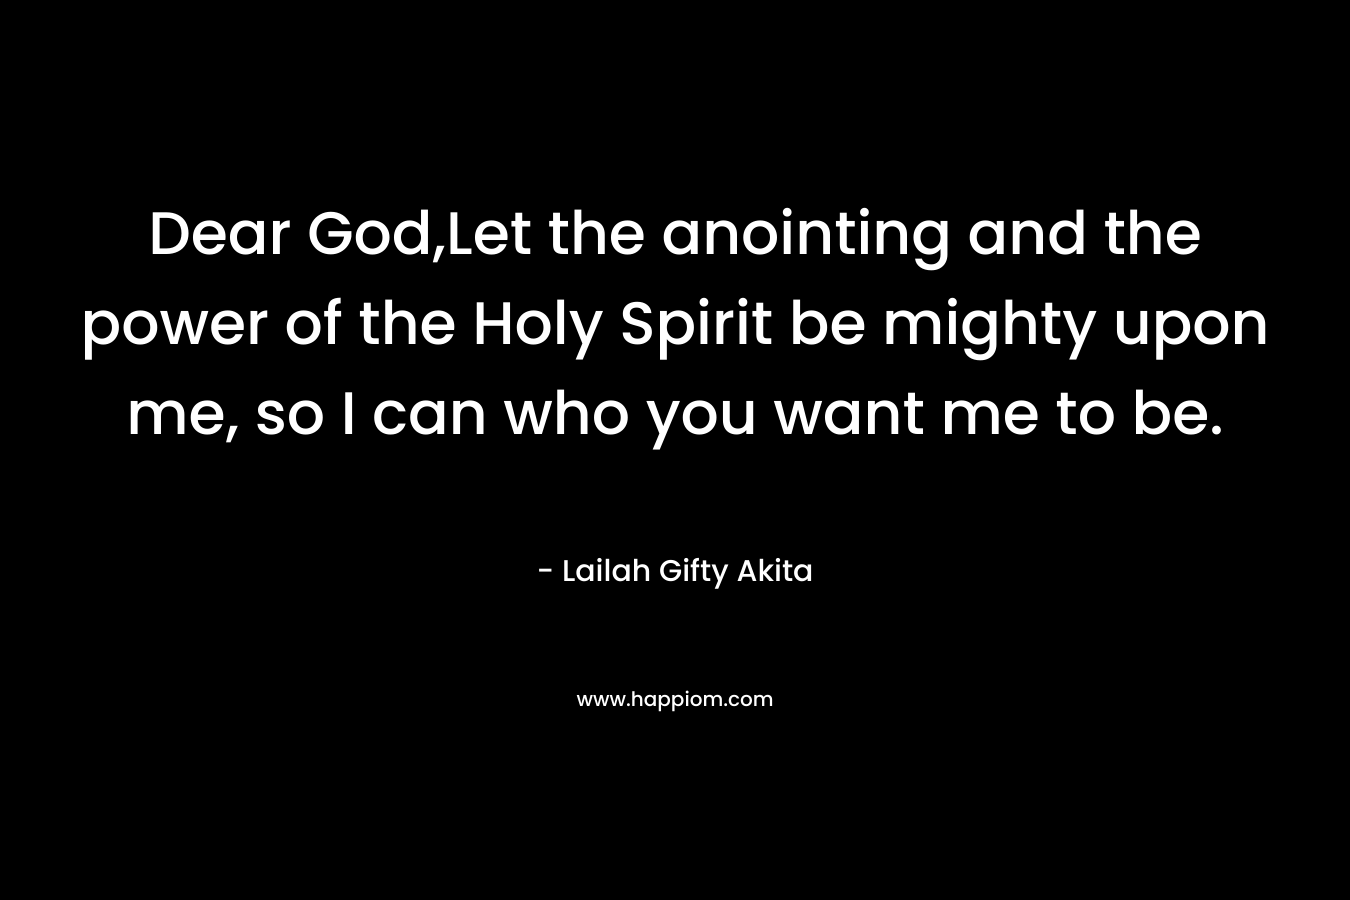 Dear God,Let the anointing and the power of the Holy Spirit be mighty upon me, so I can who you want me to be. – Lailah Gifty Akita